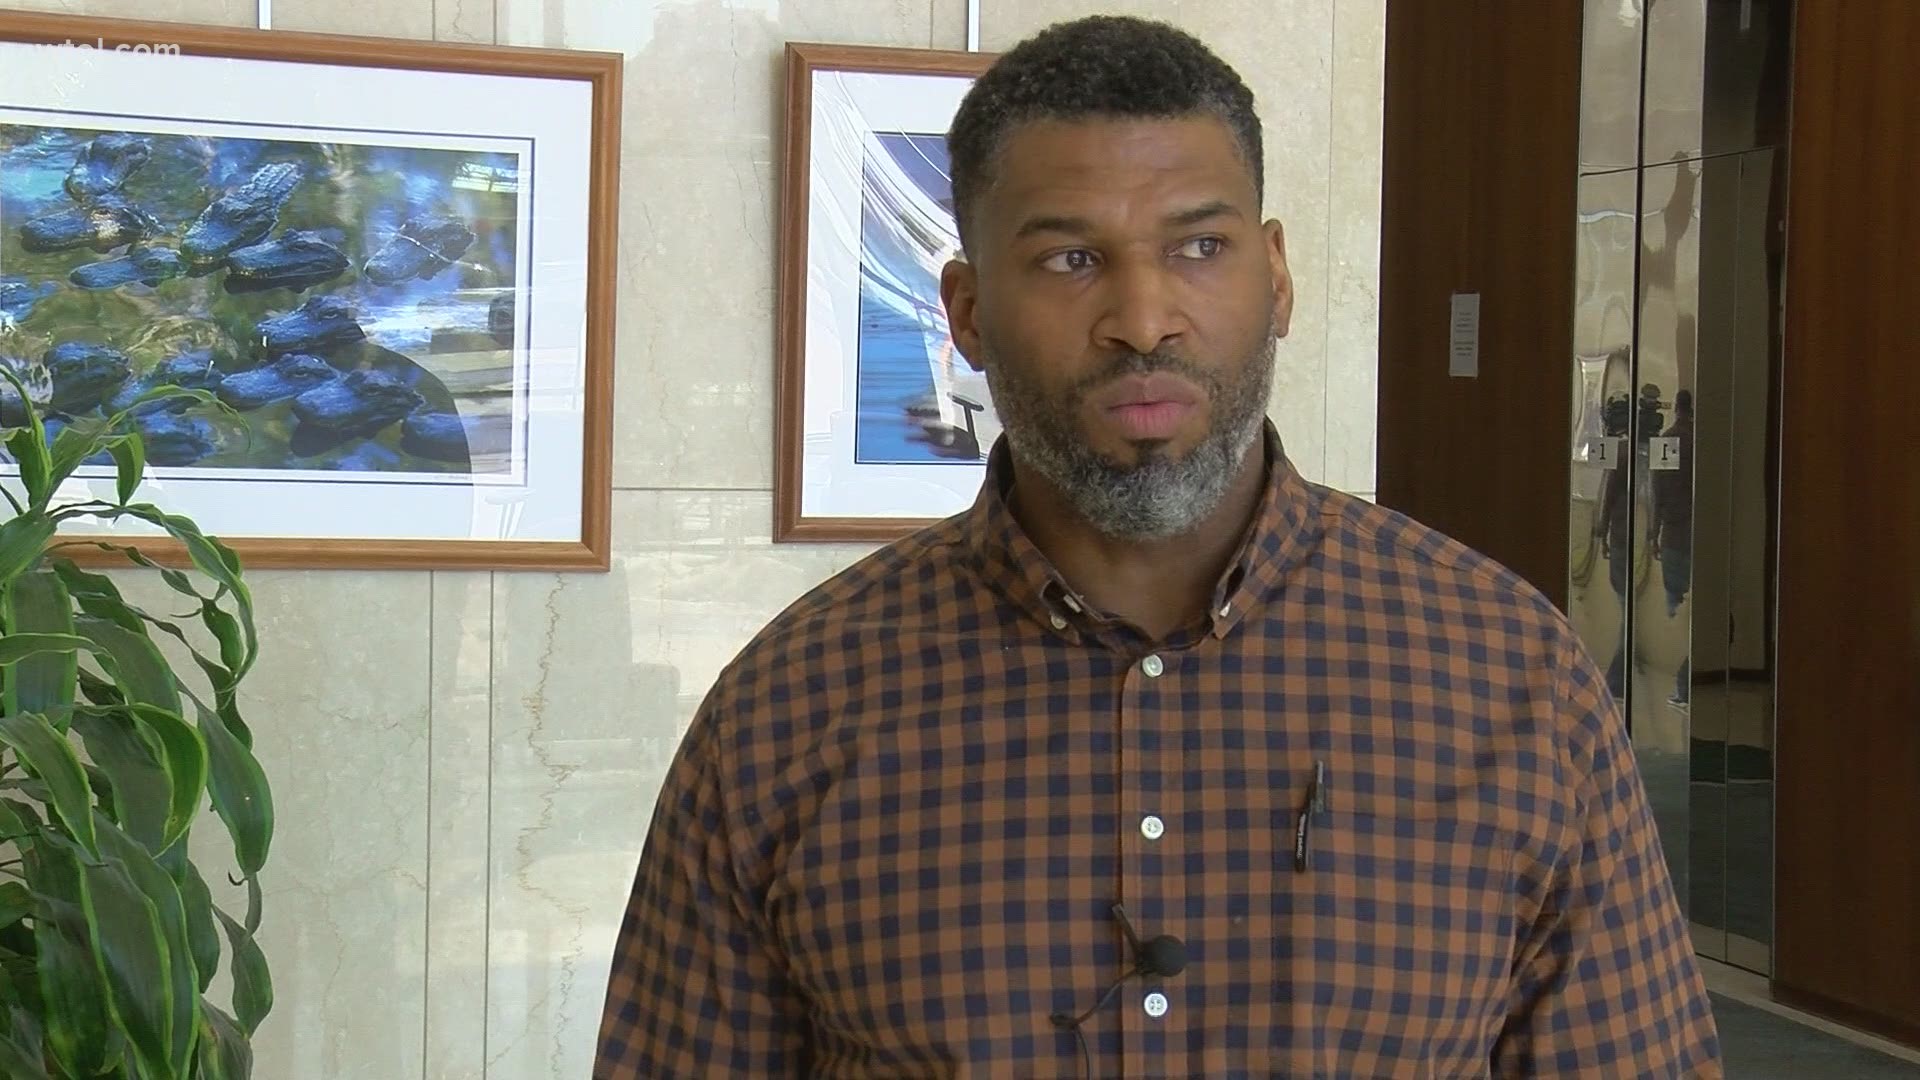 JoJuan Armour says he understands the community's concern, but hopes the good outweighs the bad